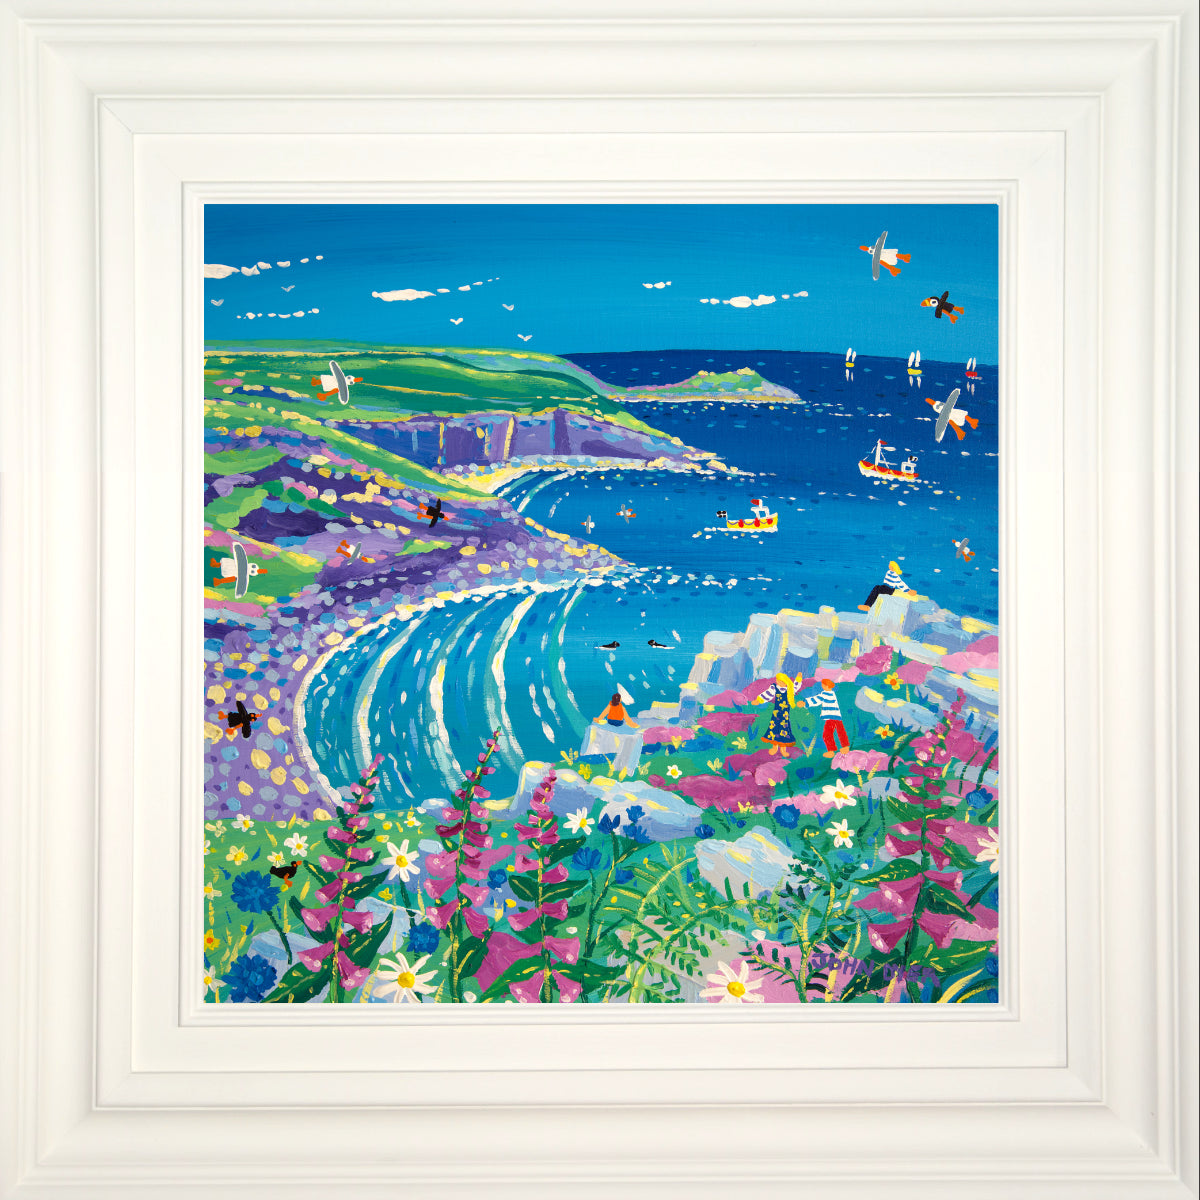 John Dyer Painting. Listening to the Waves, Zennor Head